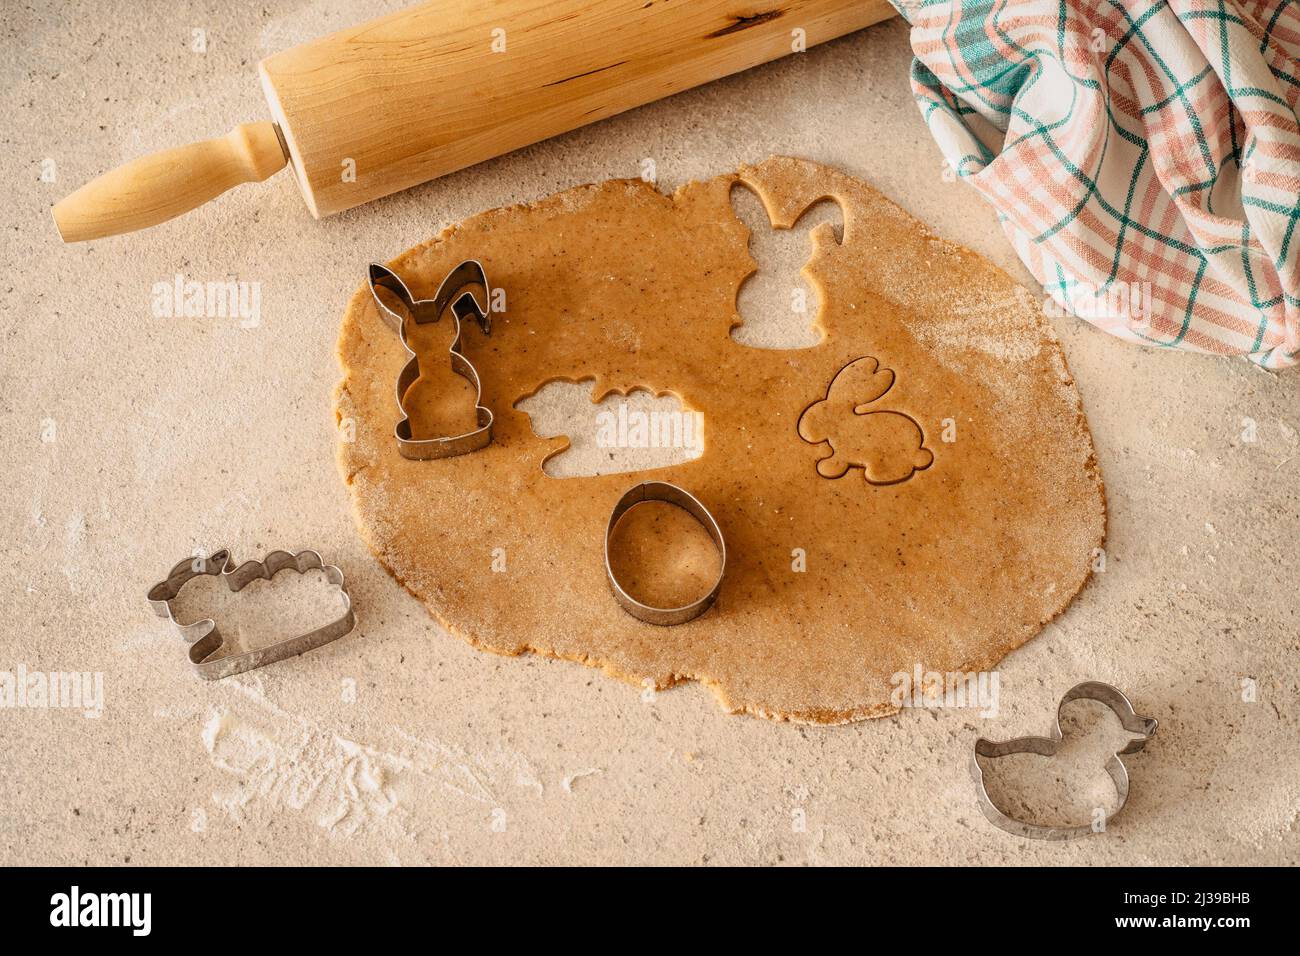 Easter baking flat lay.Spring symbols made from gingerbread.Homemade cookies.Easter bunny,rabbit,eggs and ducks from delicious honey dough. Stock Photo